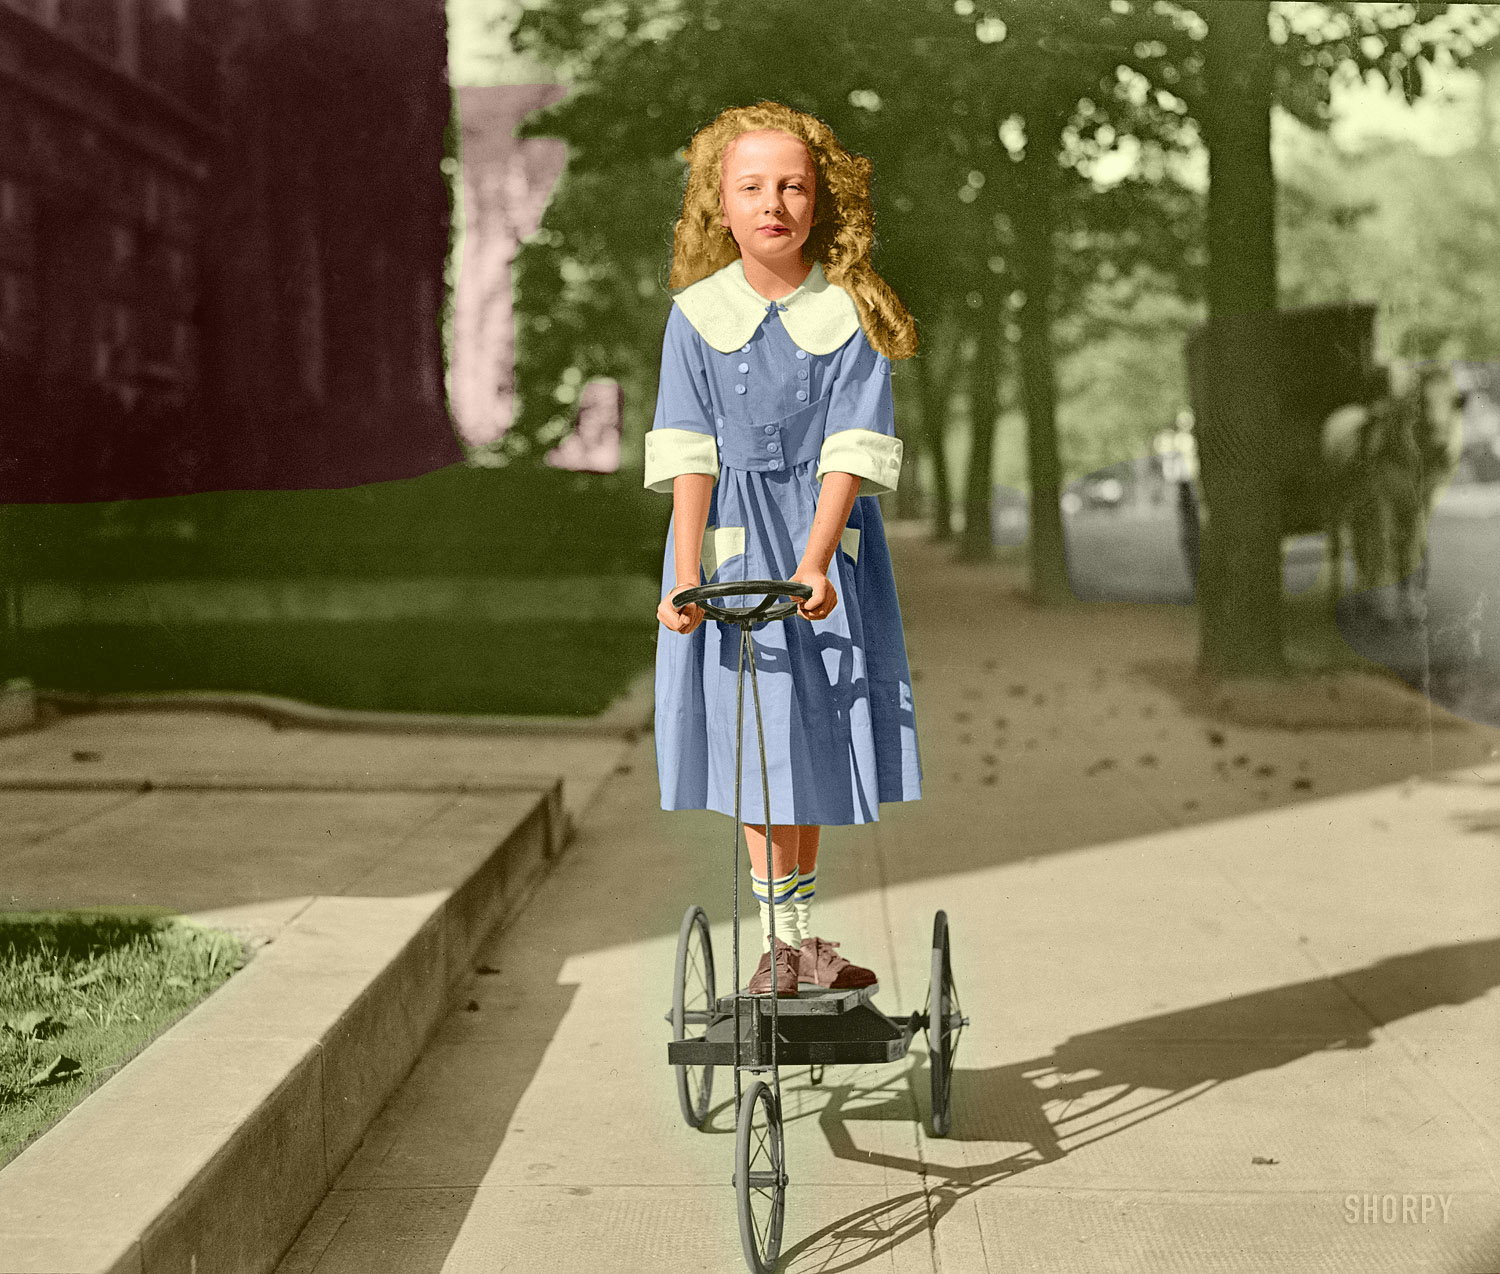 This is a colorized version of Mary Dixon Palmer: 1920.  It looks like this outlandishly dangerous-looking device had a treadle instead of pedals. View full size.